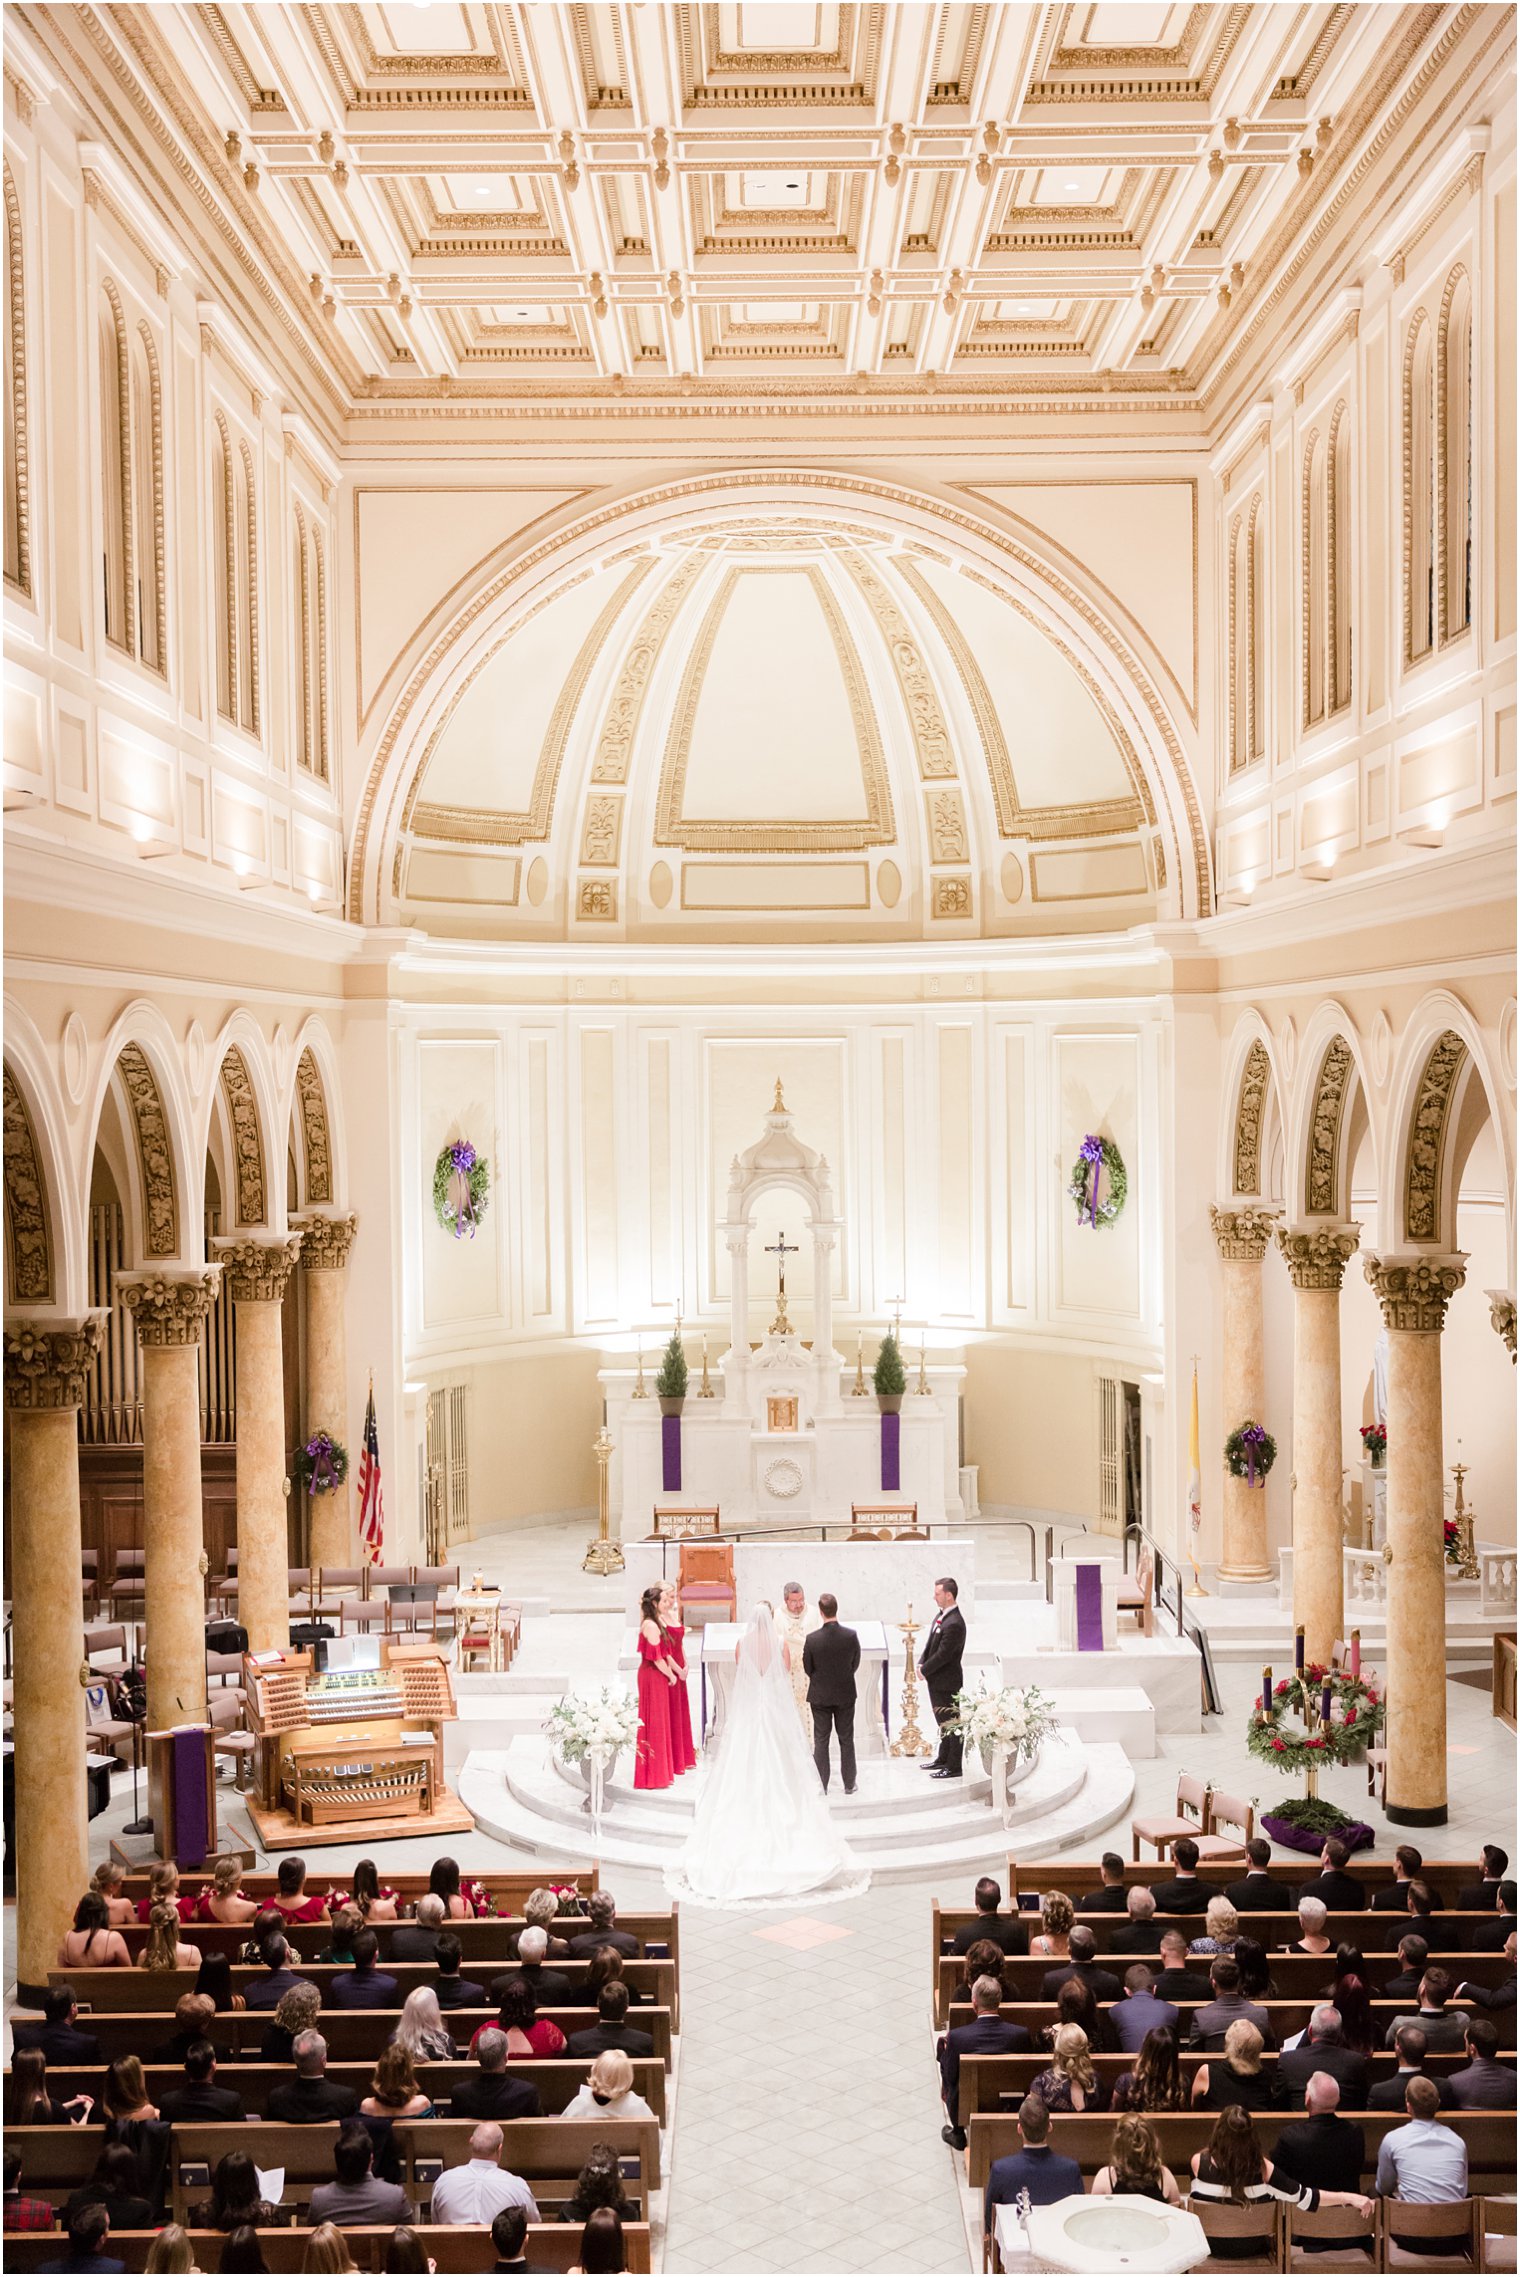 Wedding ceremony at Immaculate Conception Church - Montclair, NJ